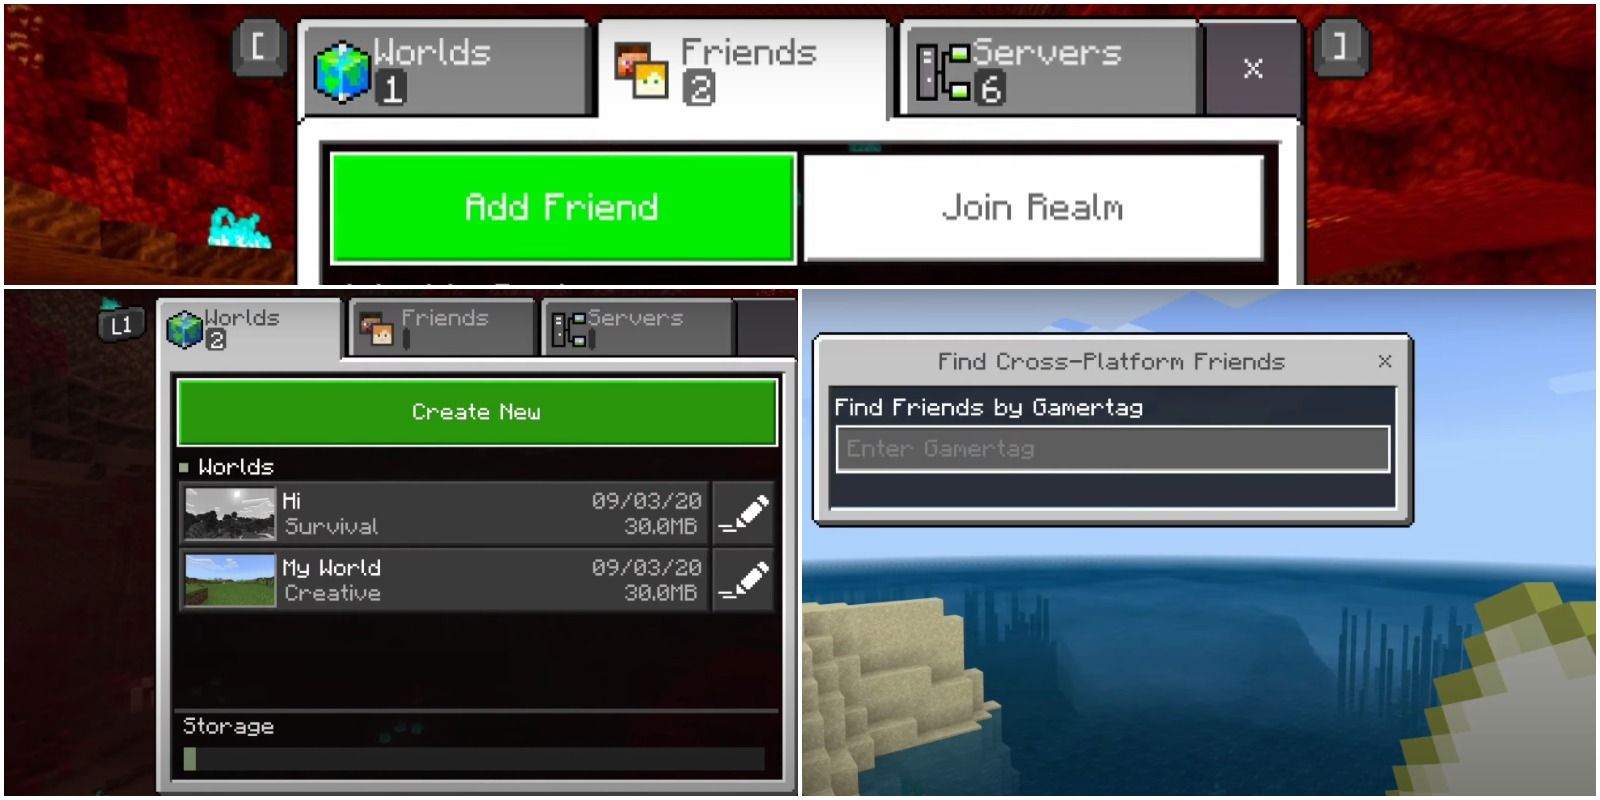 menus about adding friends and joining realms.